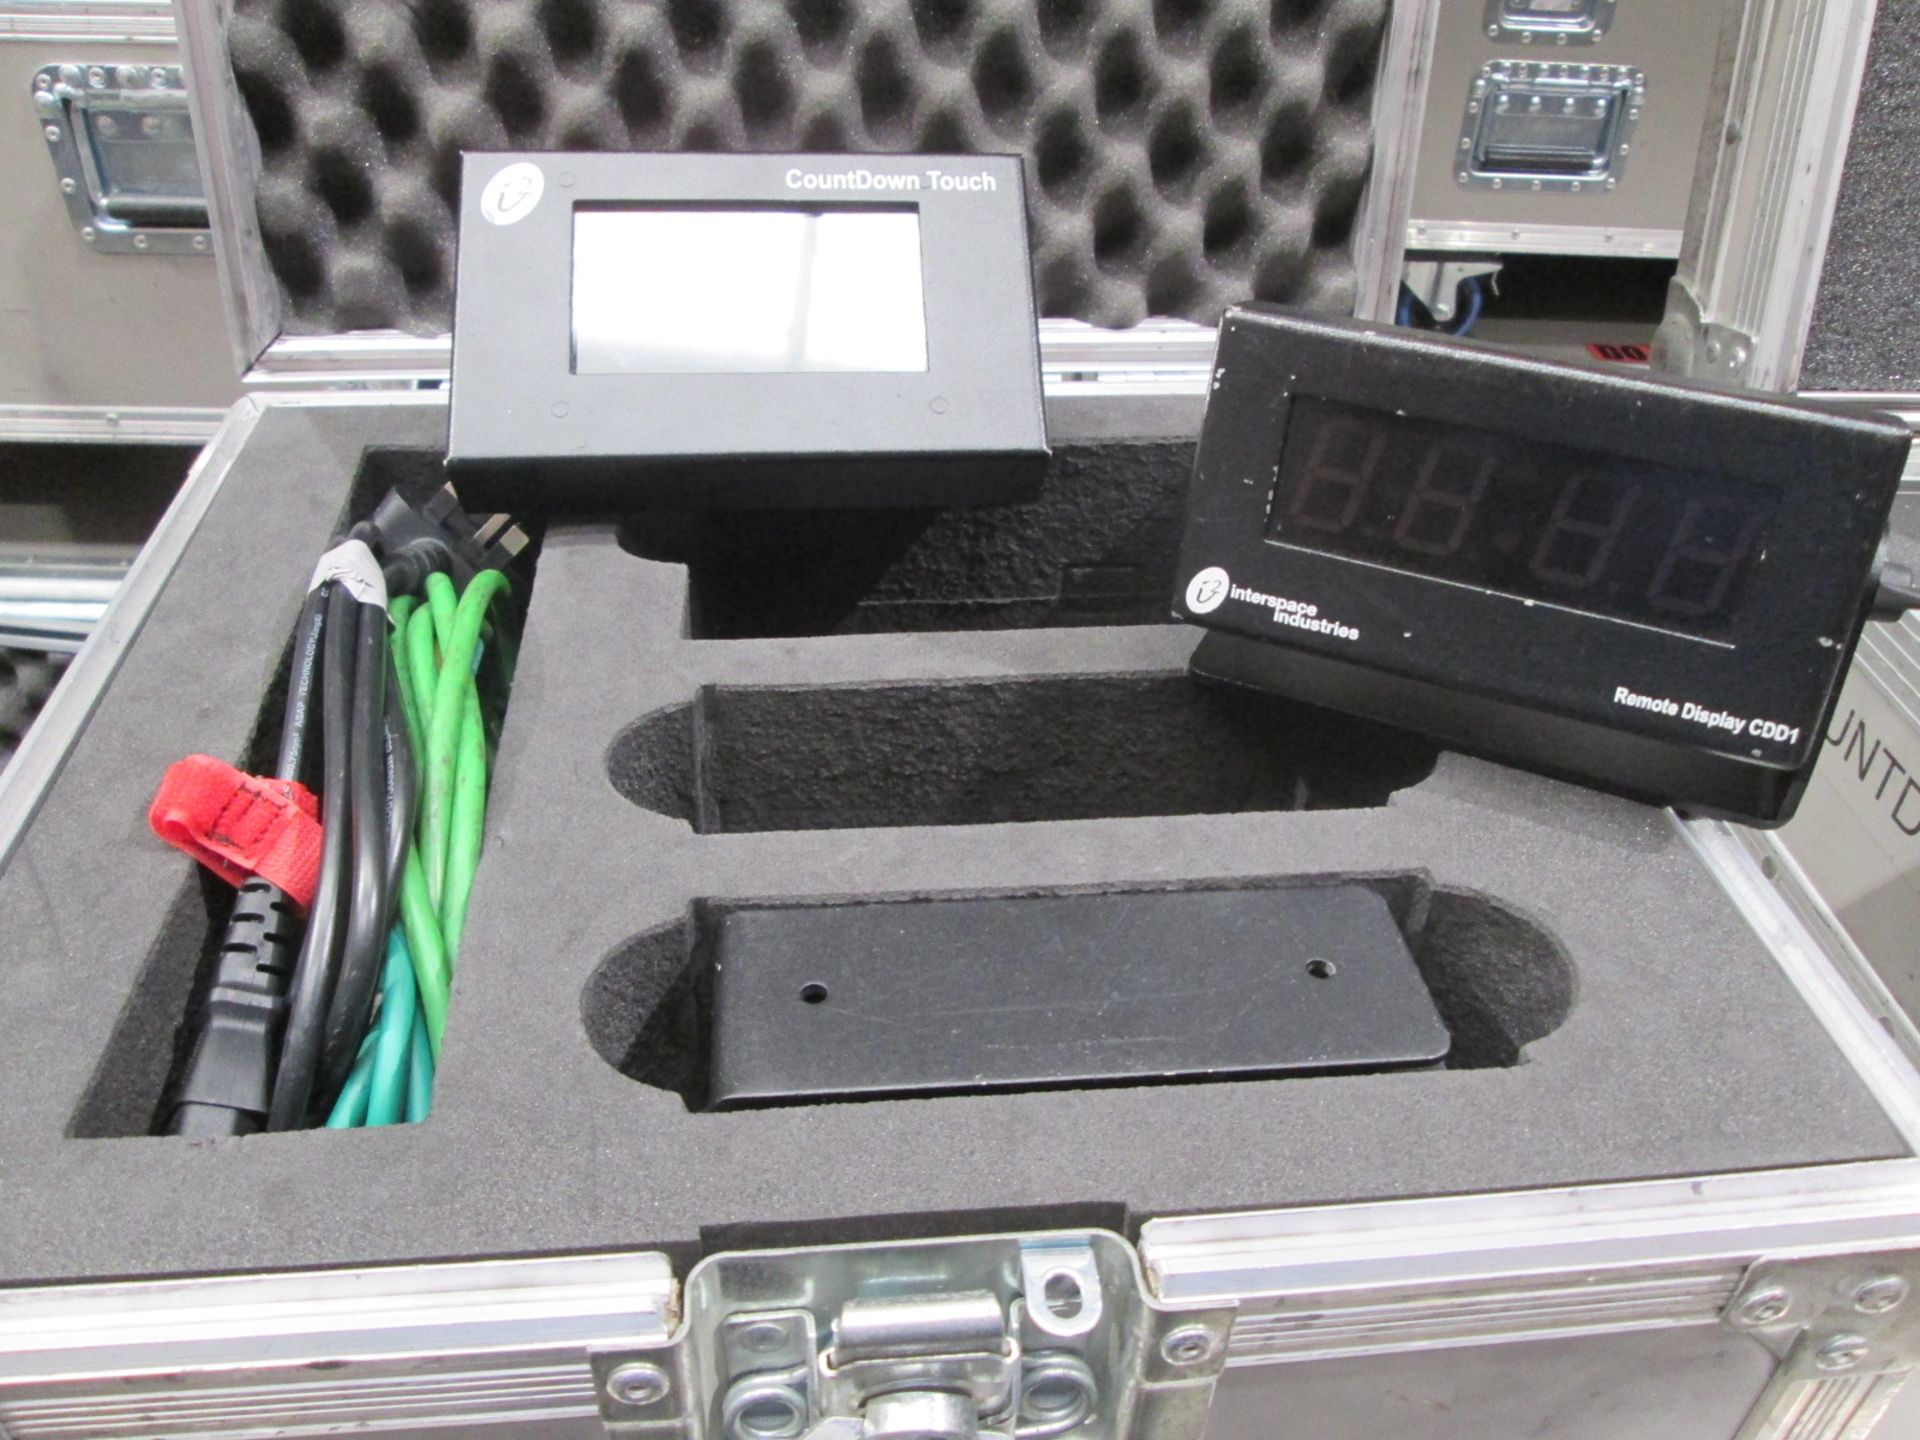 Interspace Industries Countdown Touch with 2 x CDD1 remote Displays, In flight case (Qty 7) - Image 2 of 5